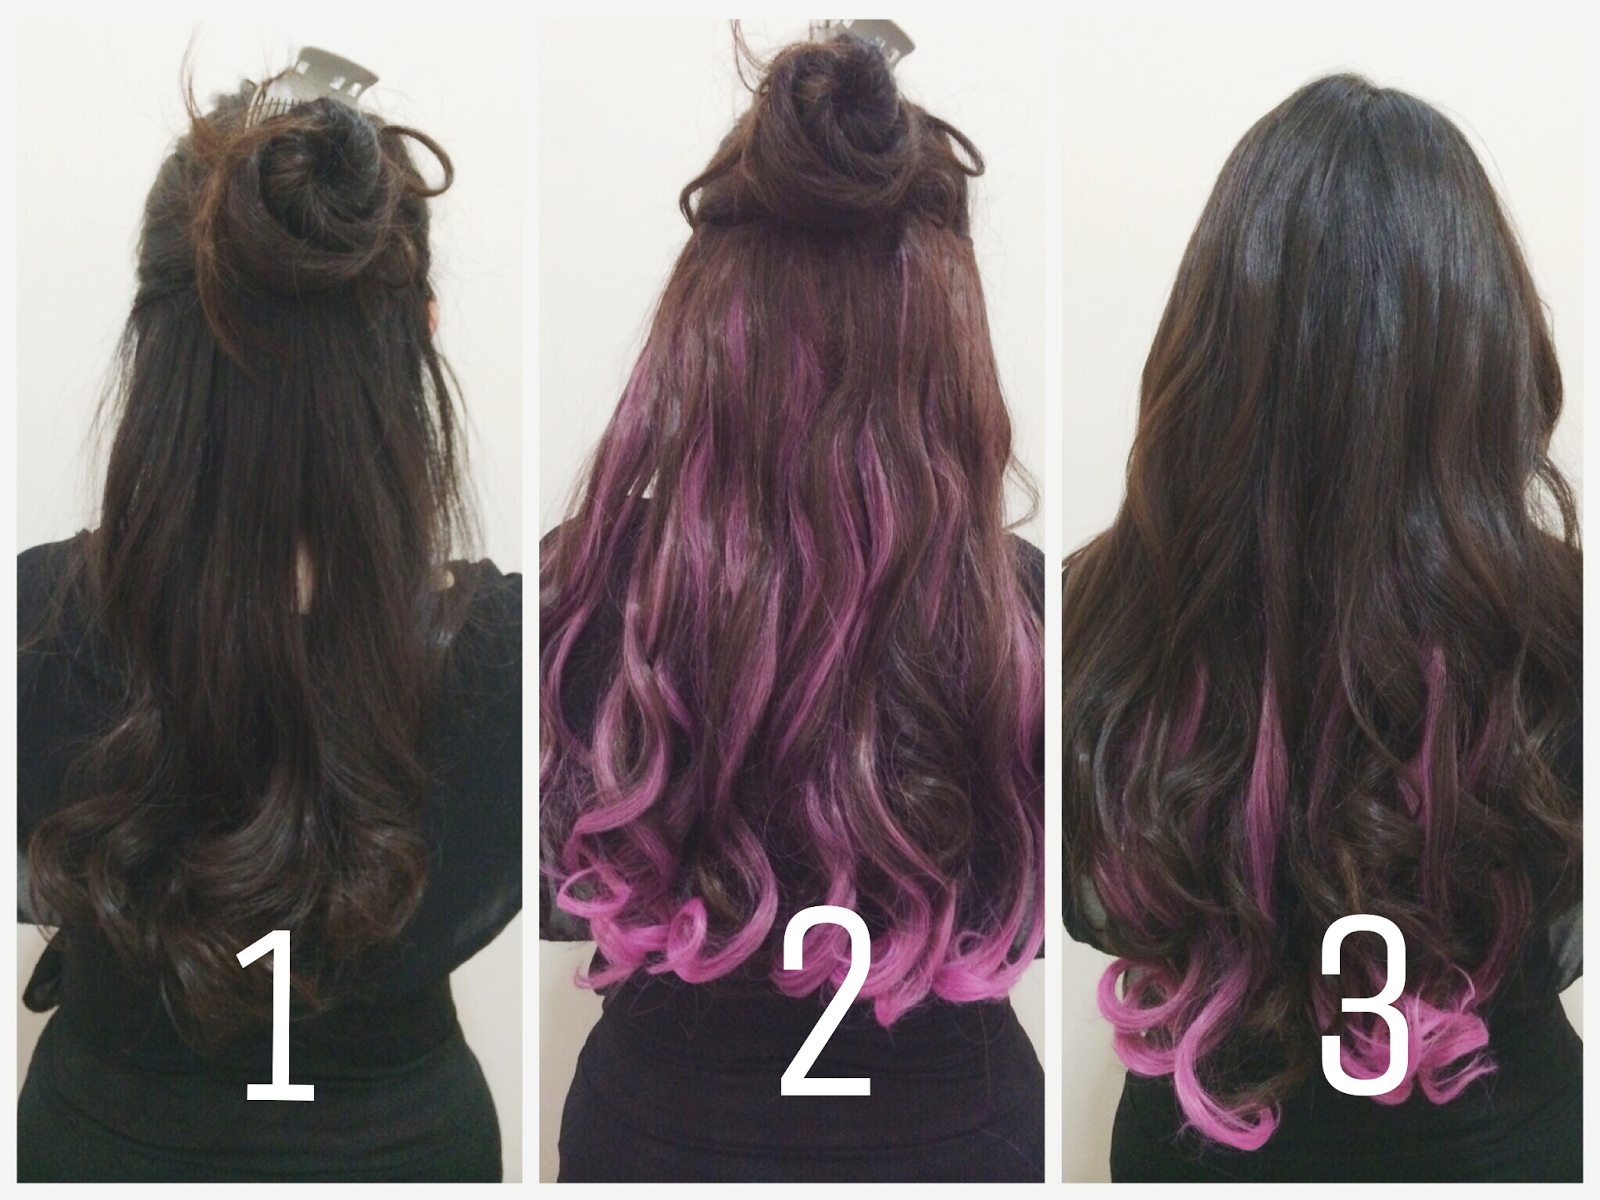  warna  rambut  ombre  red purple warna  ombre  rambut  blue and 